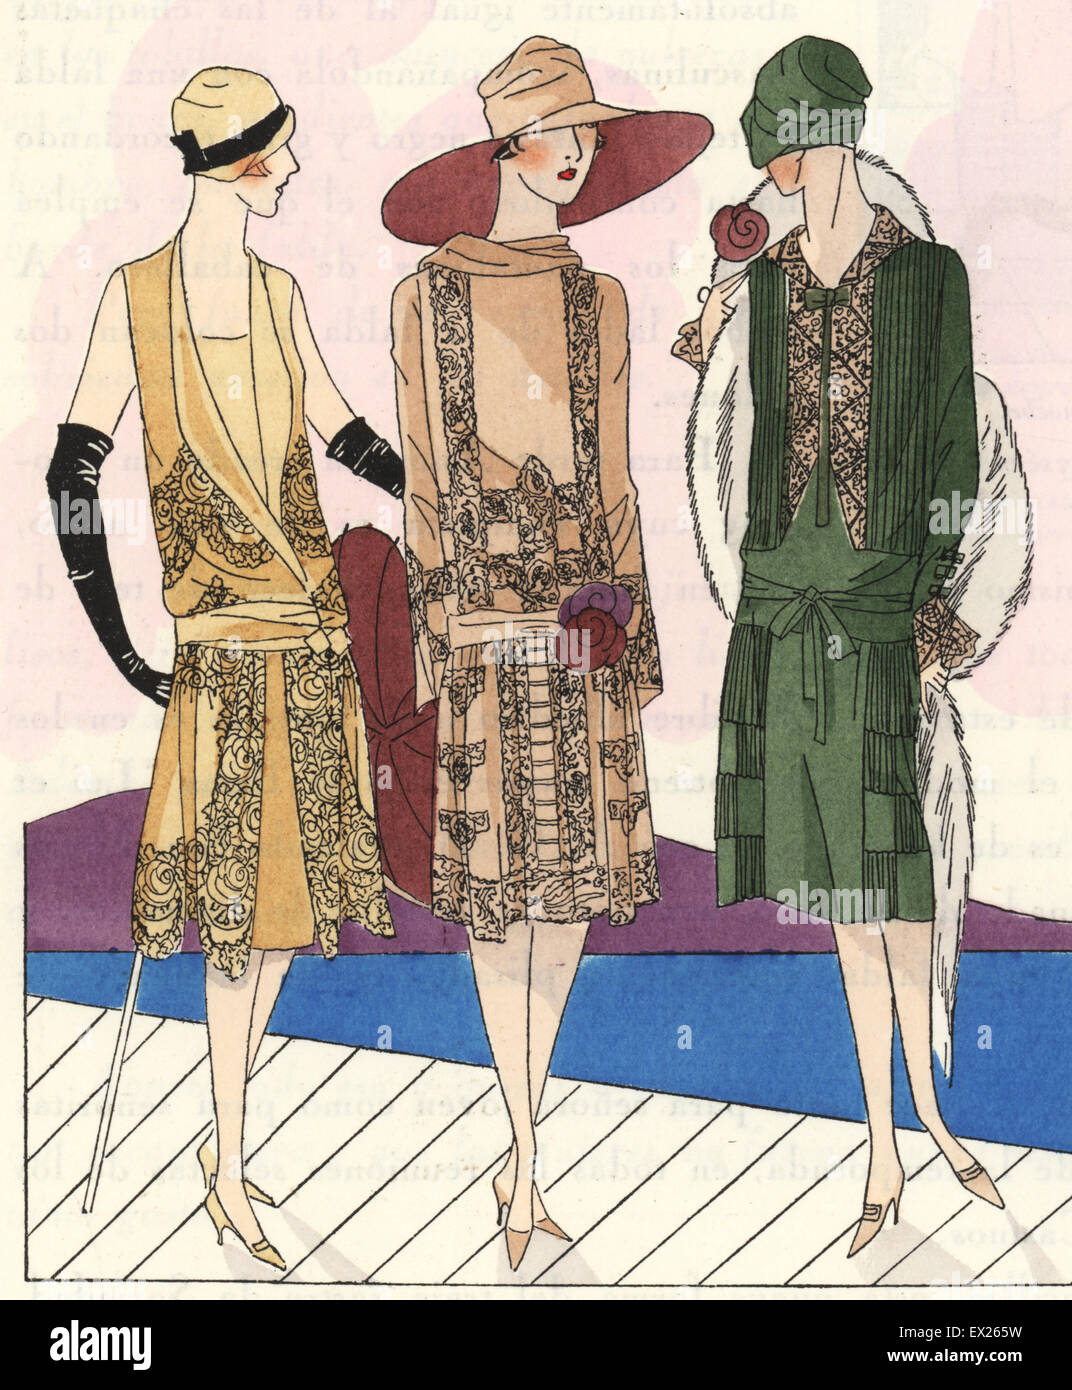 Women in evening dresses decorated with lace. Lithograph with pochoir (stencil) coloring from the luxury fashion magazine Art Gout Beaute, ABG, Paris, April 1926. Stock Photo